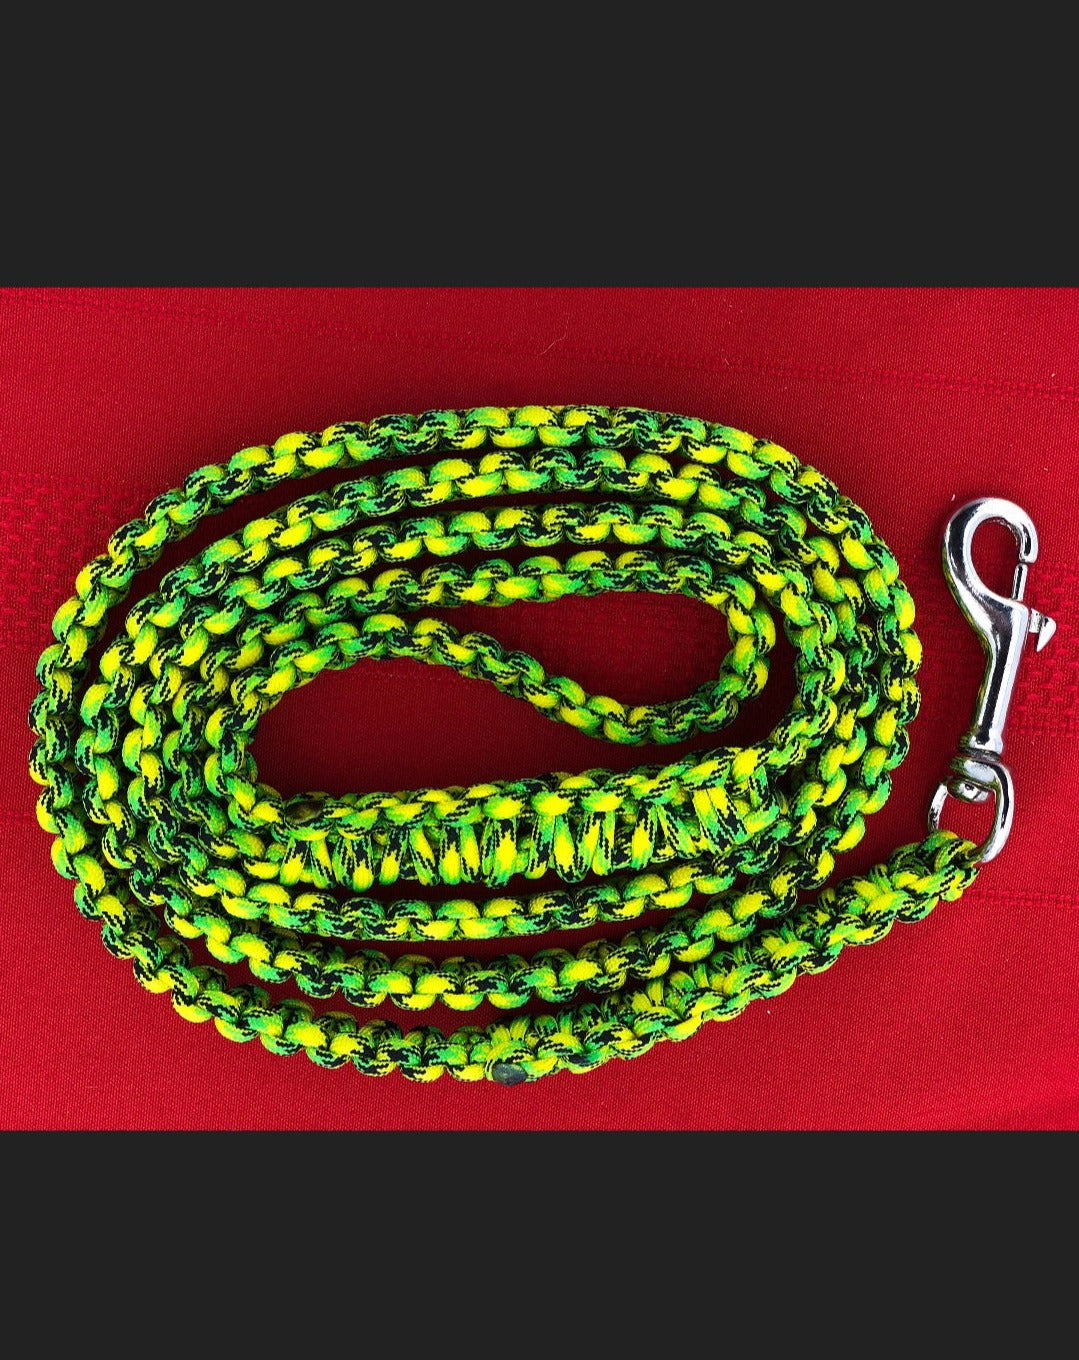 4Ft and 6Ft Custom Colors Paracord Dog Leashes!! Dog Leash